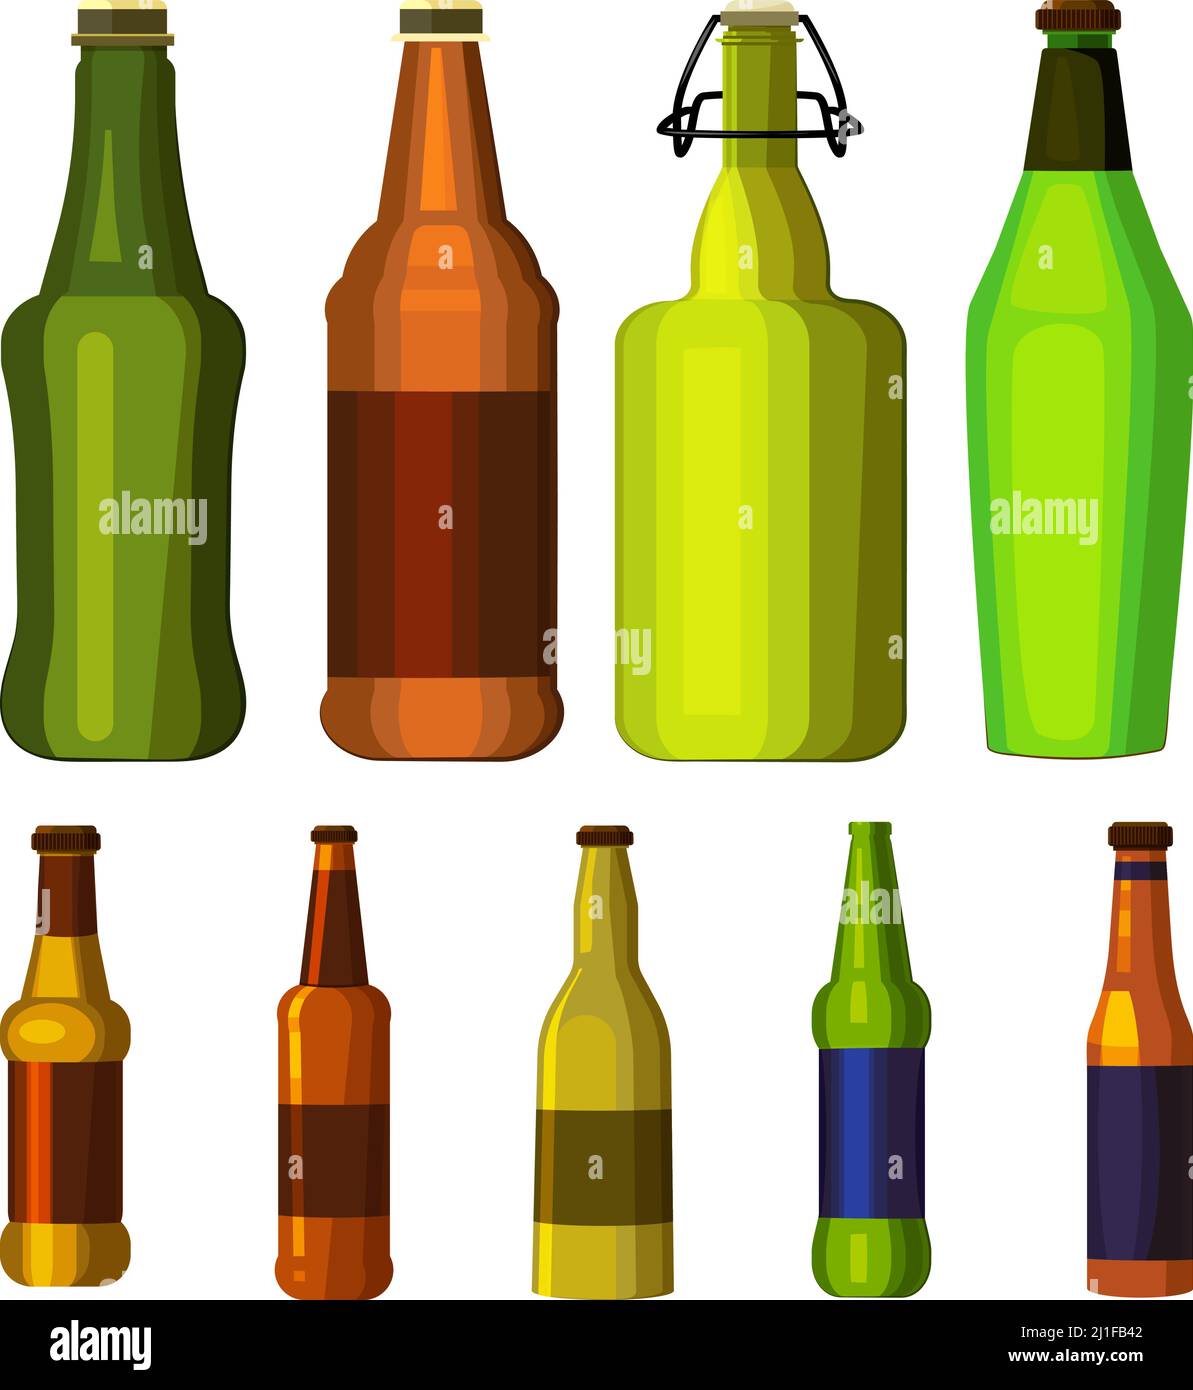 Beer bottles set. Collection of various alcoholic beverages. Can be used for topics like ale, pub, drink Stock Vector